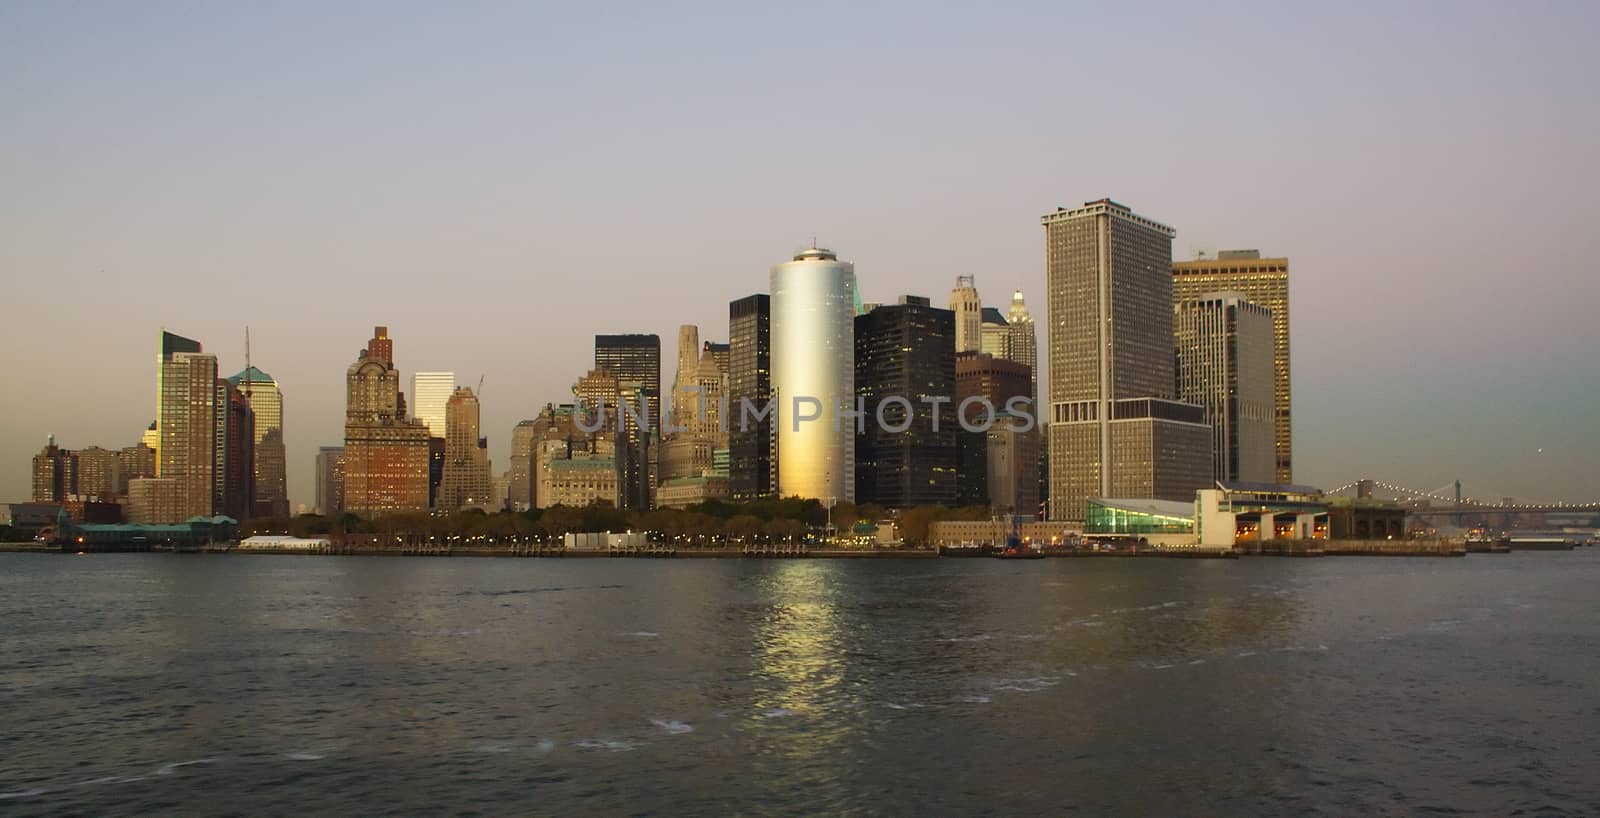 Southmost point of Manhattan, from the river by totony